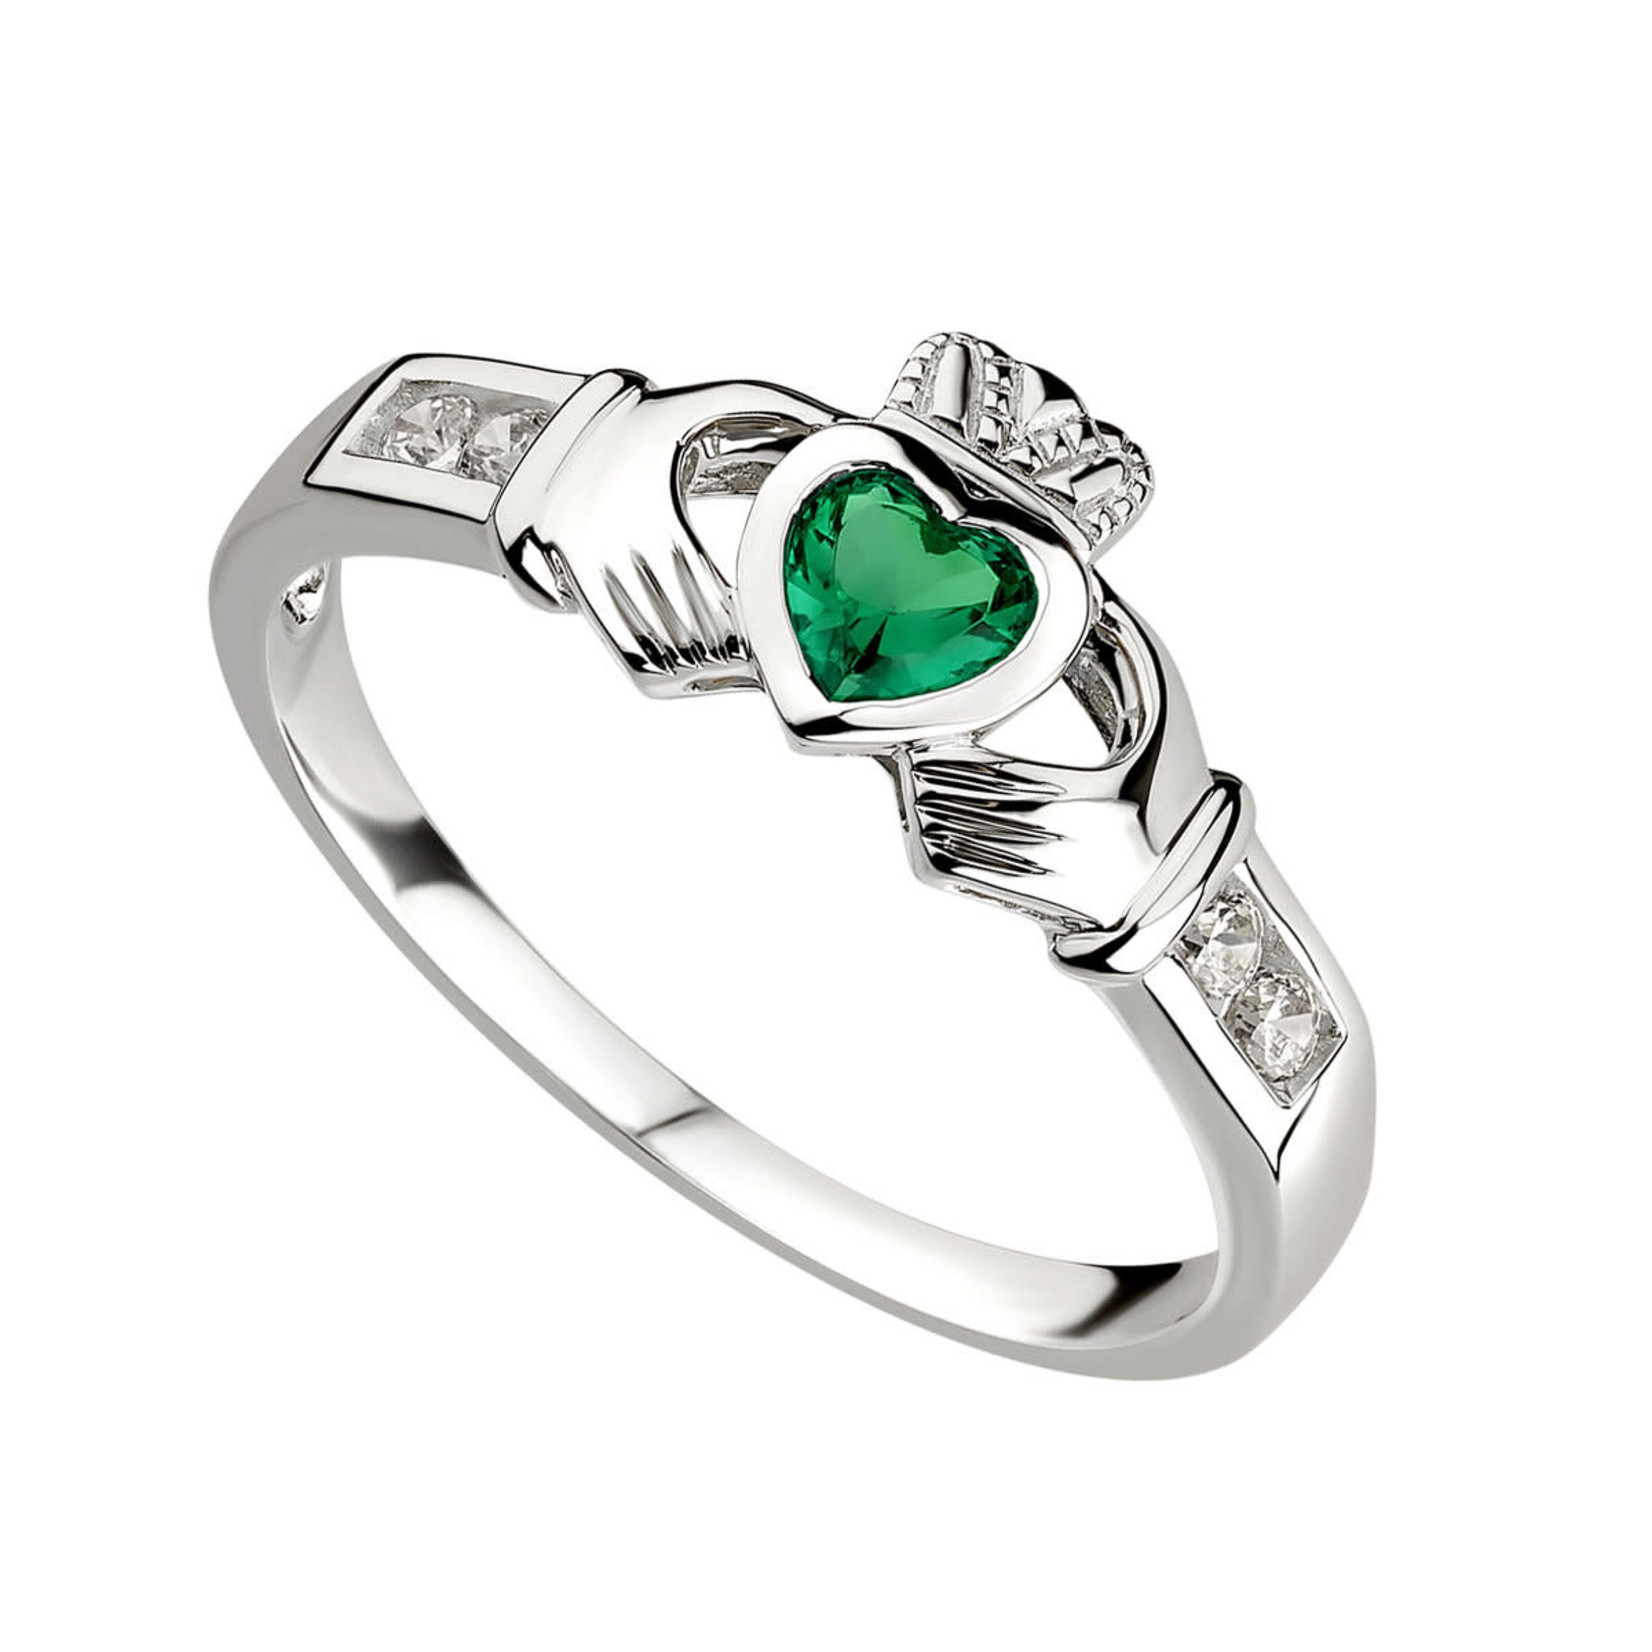 SOLVAR LIMITED Sterling Silver Synthetic Emerald/CZ Claddagh Ring Sz6